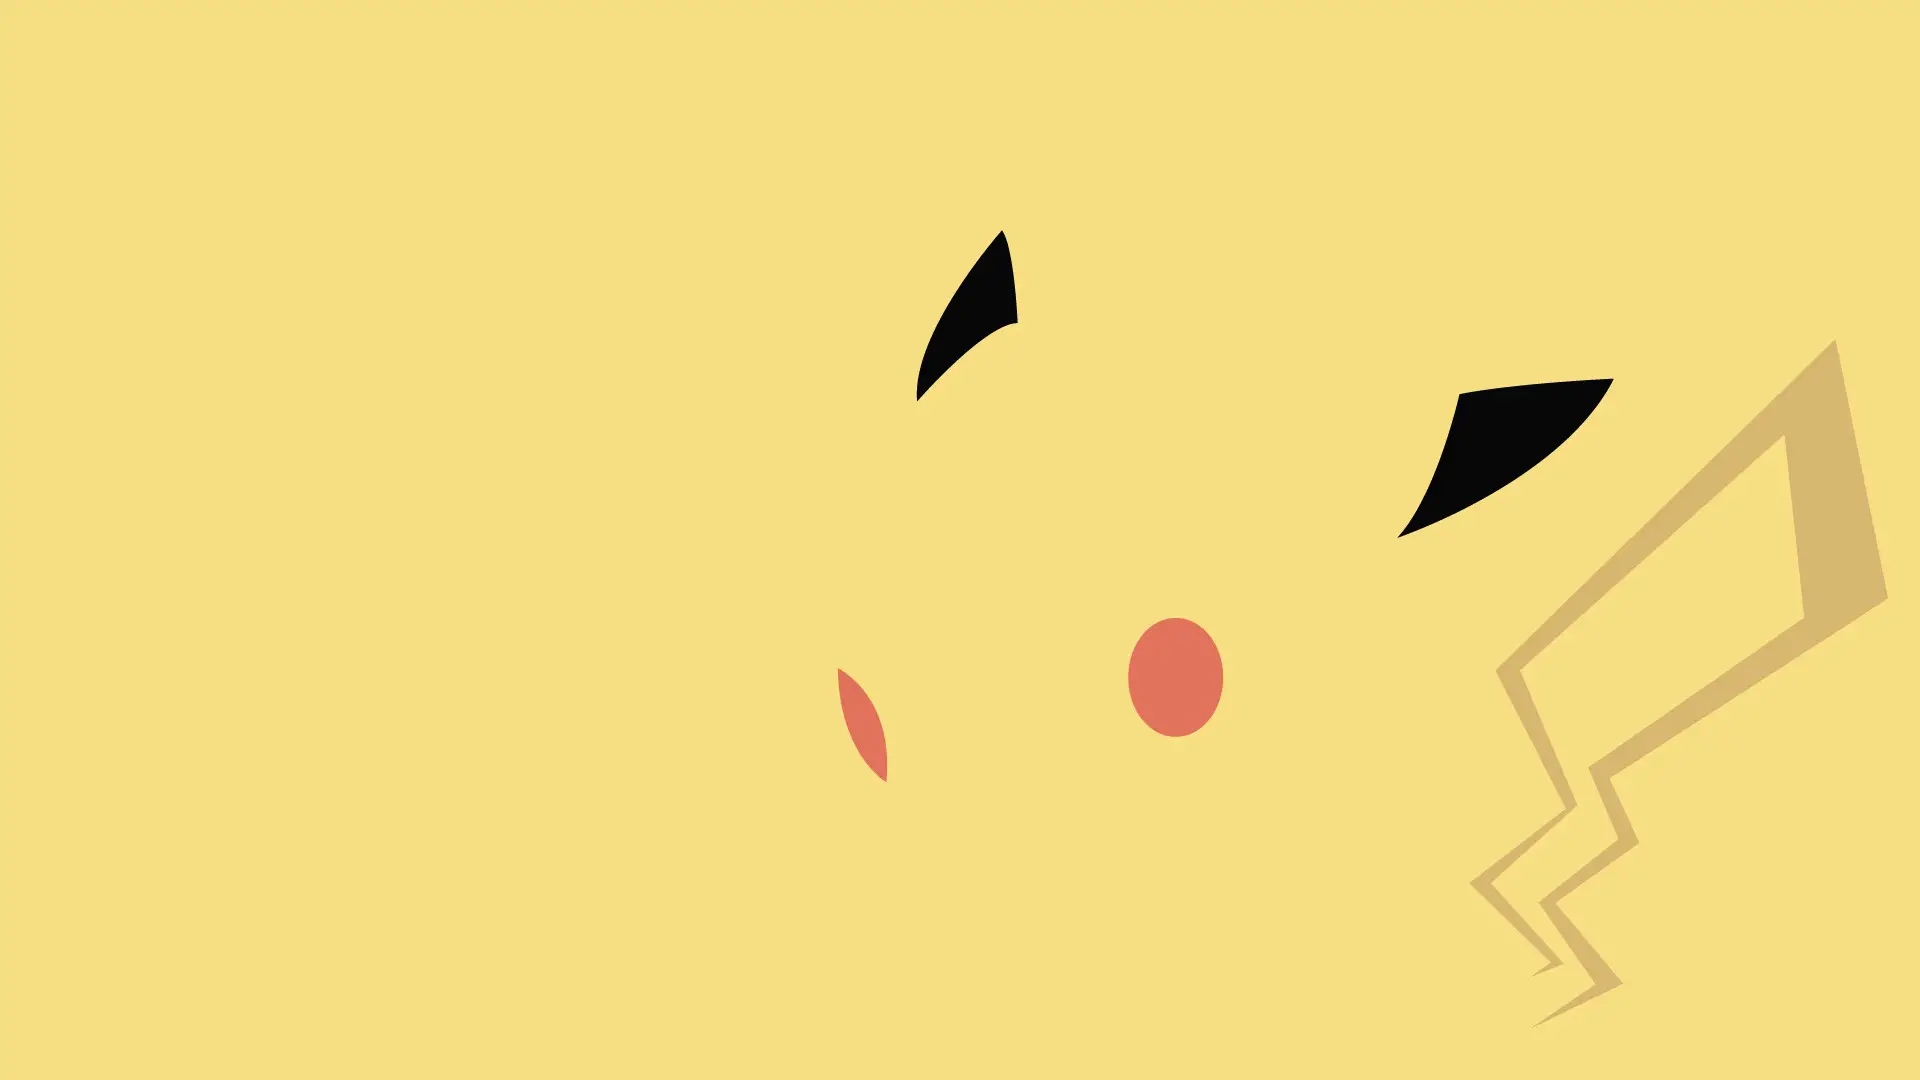 Attendees of Summer in the City will be able to discover the UK’s very first live ‘Horde Encounter’ of Pikachu at ExCeL London on 15 August